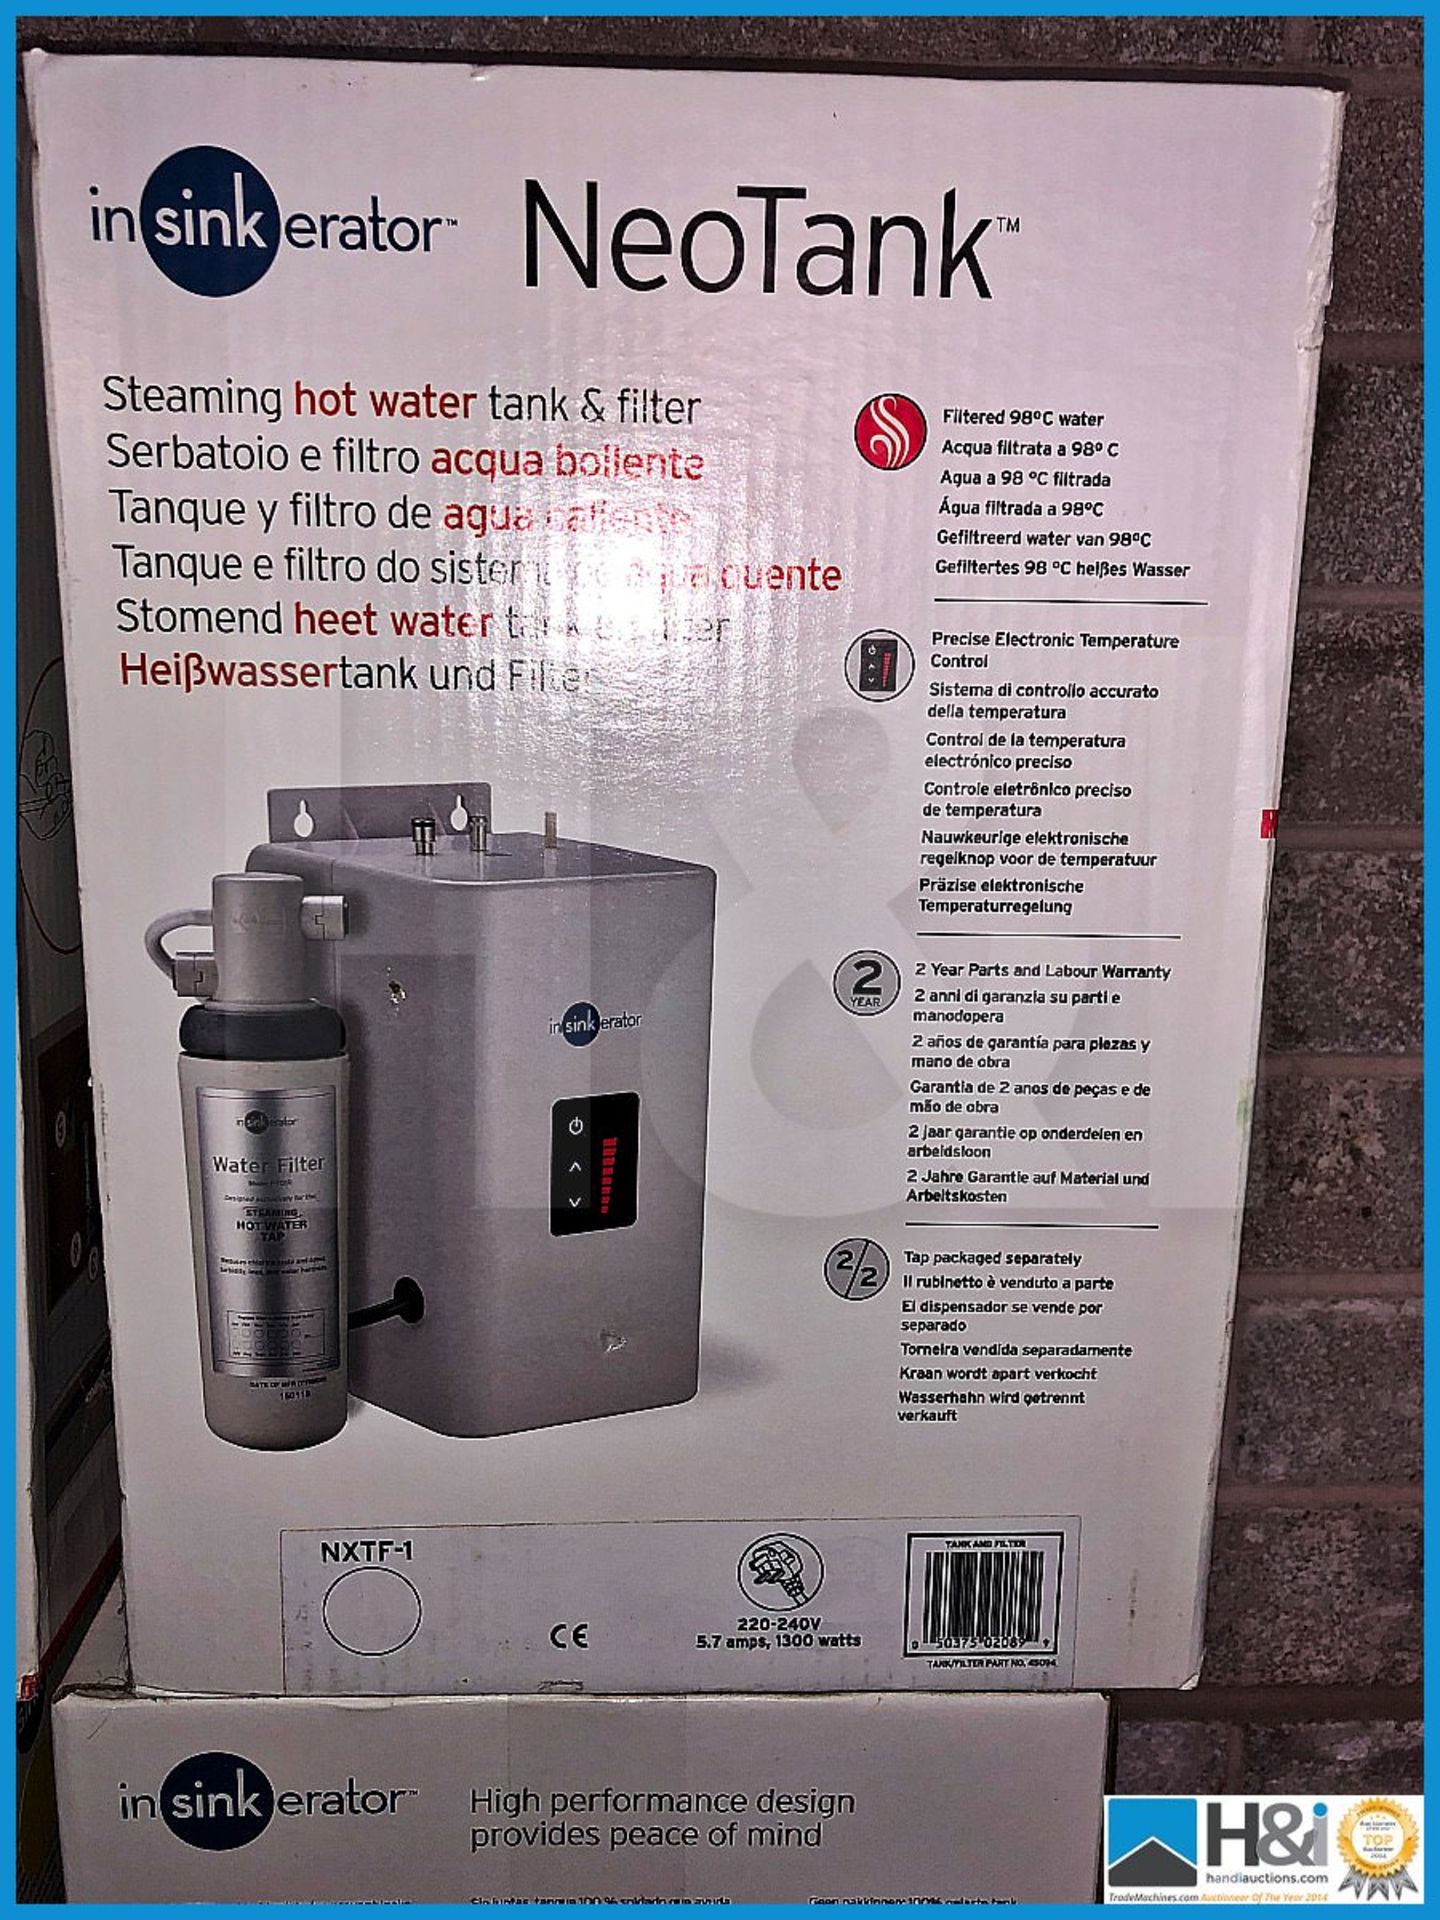 Emerson NeoTank insinkerator streaming hot water tank and filter. Brand new in box RRP GBP 499